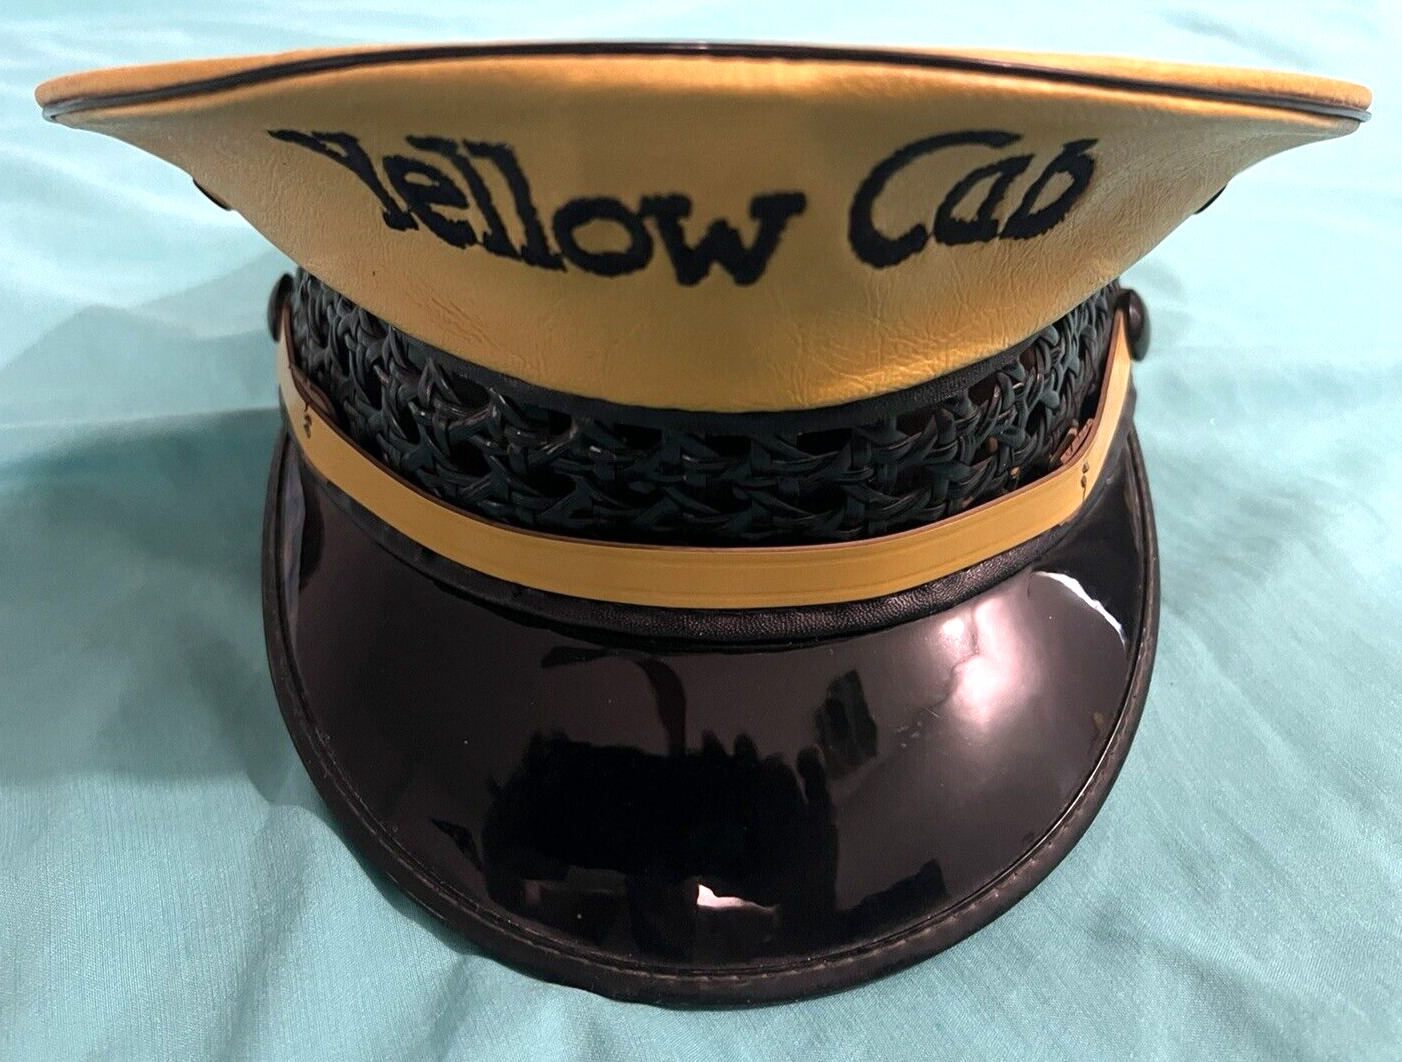 YELLOW CAB VINTAGE AUTHENTIC 1940s MILITARY-STYLE EMBROIDERED TAXI DRIVER HAT